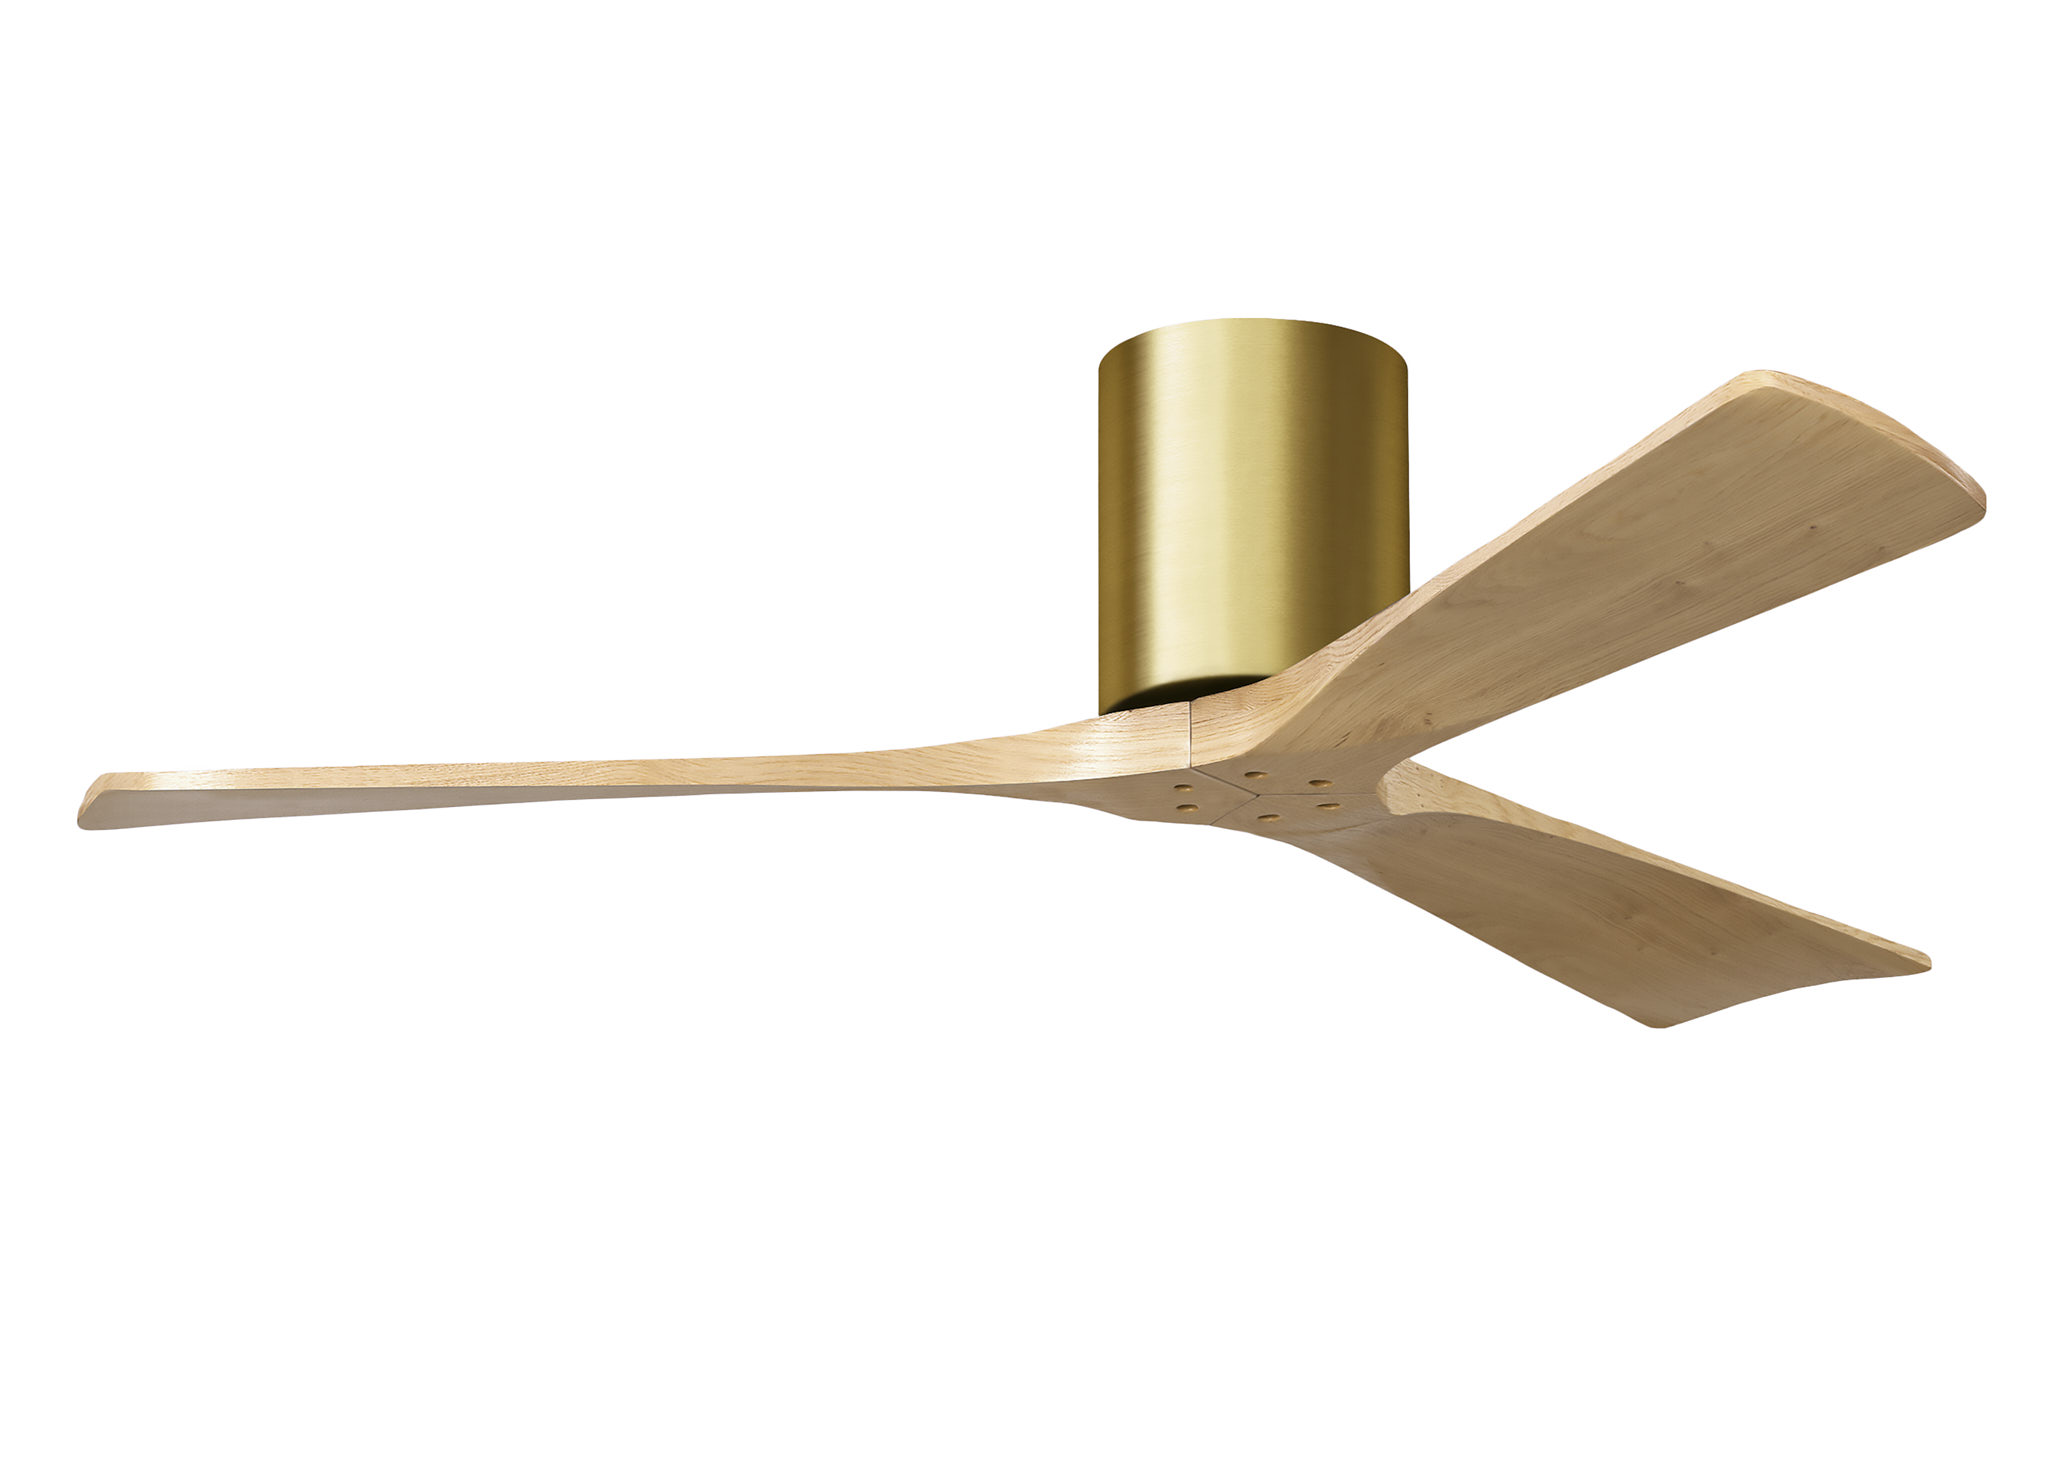 Irene-3H 6-speed ceiling fan in brushed brass finish with 52